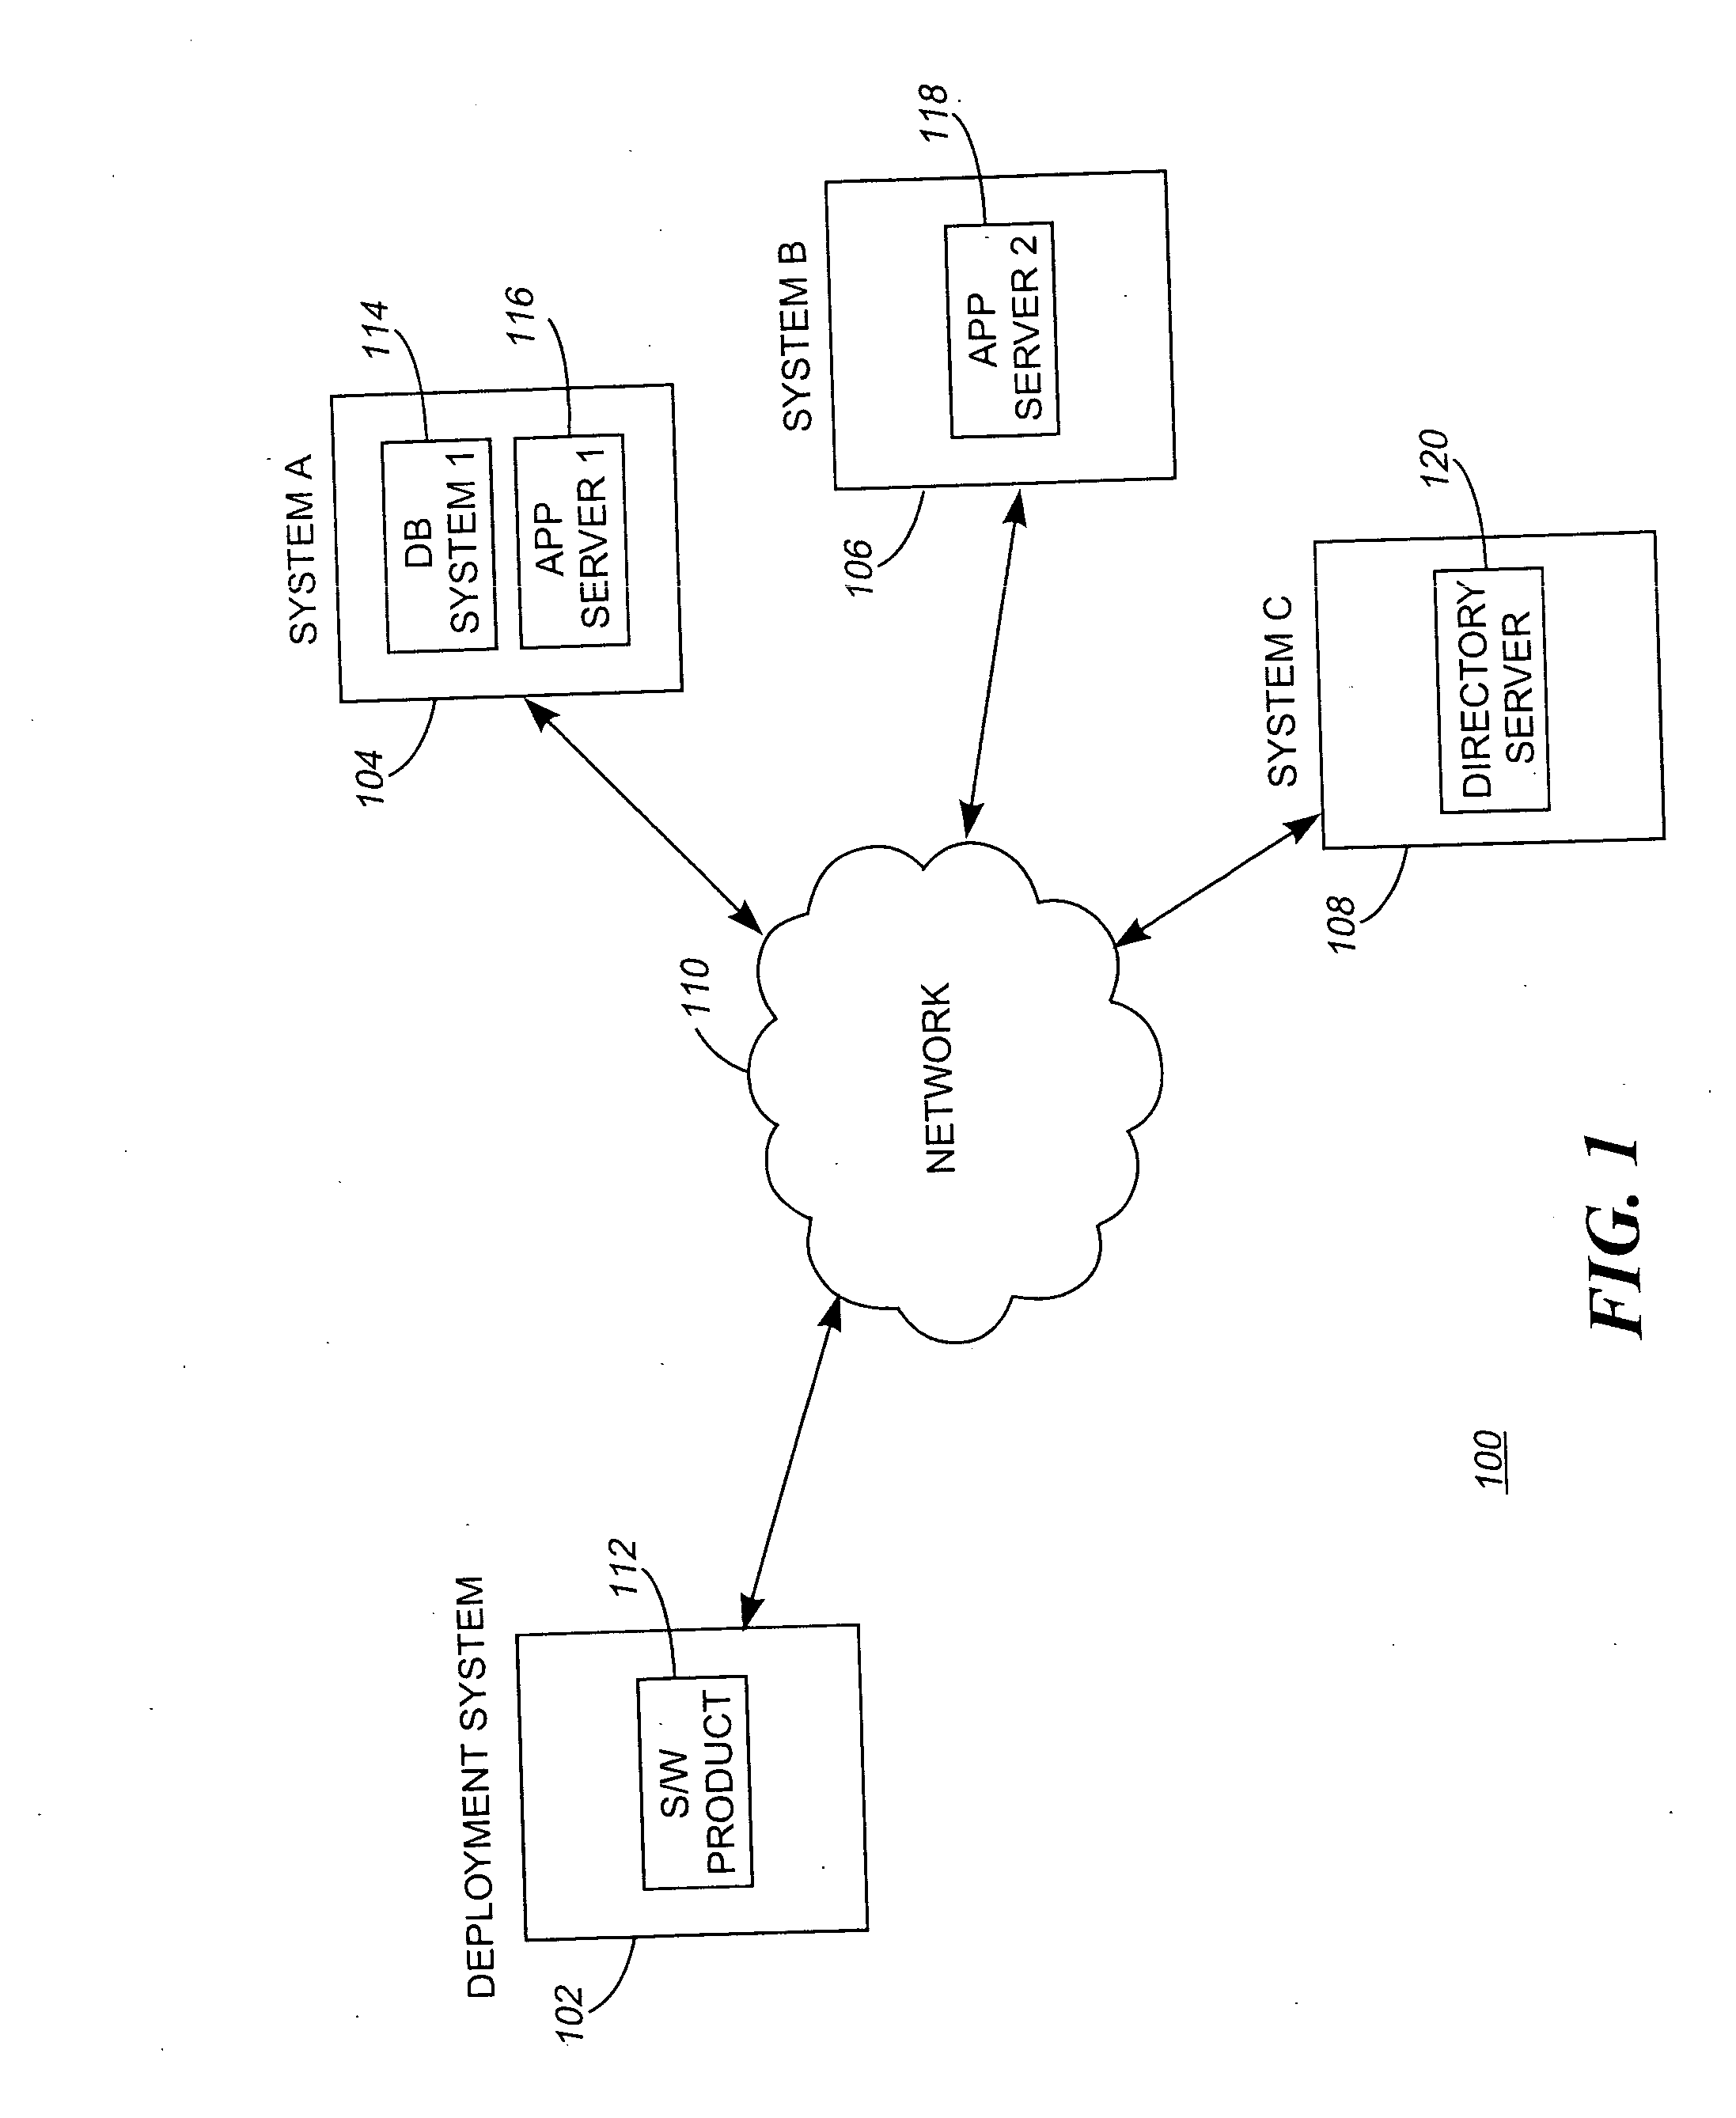 System and method for deploying software based on matching provisioning requirements and capabilities